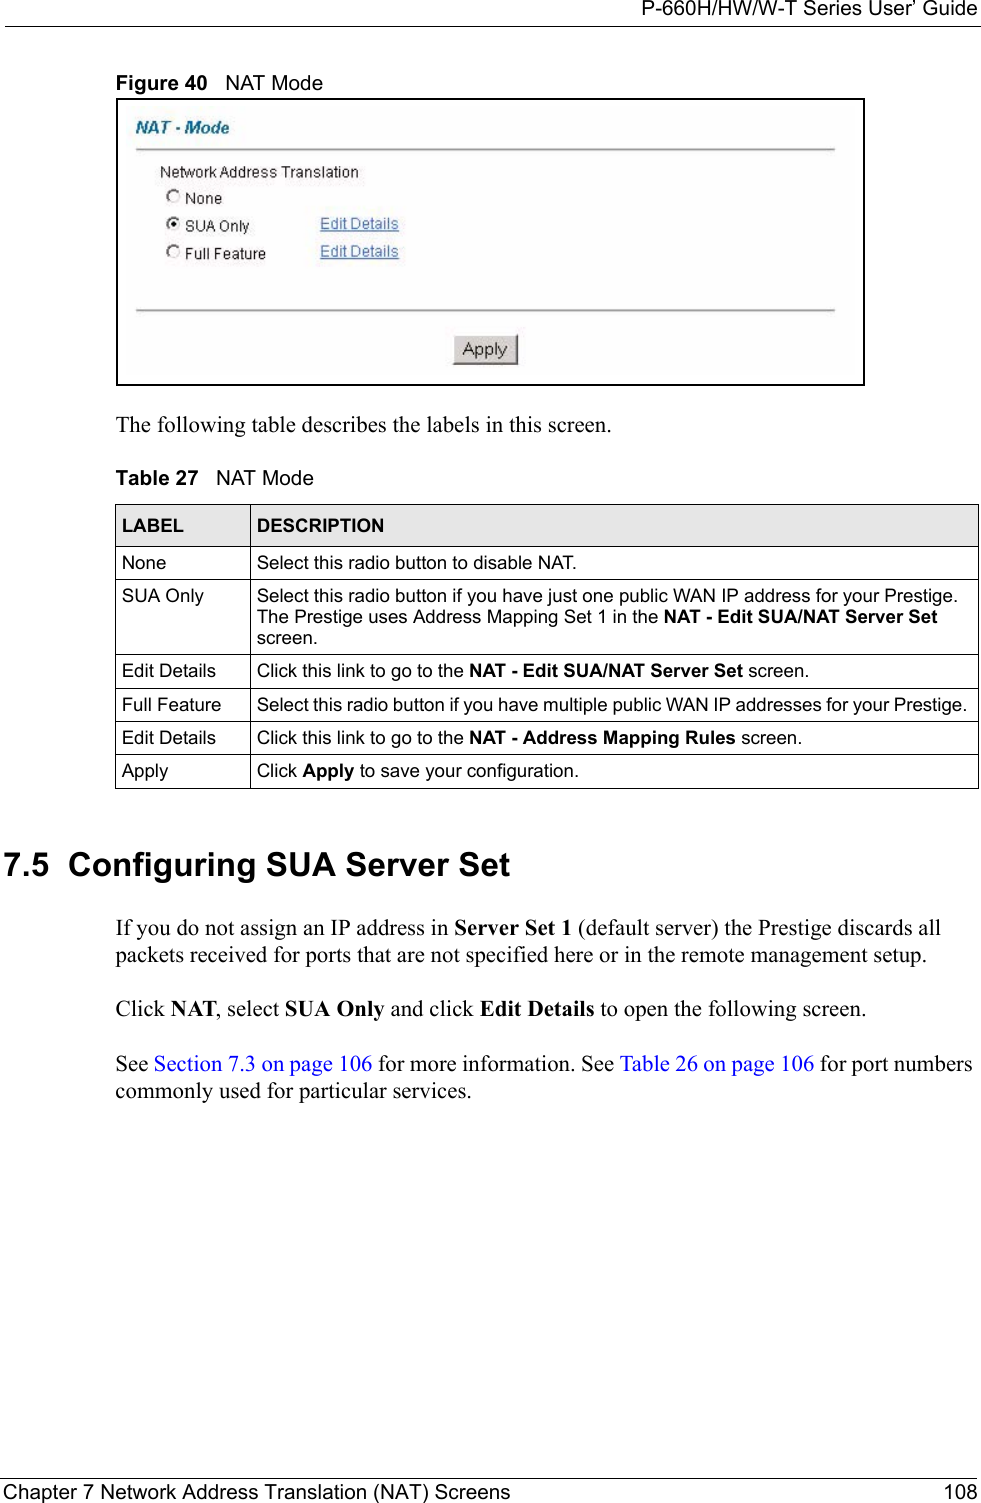 P-660H/HW/W-T Series User’ GuideChapter 7 Network Address Translation (NAT) Screens 108Figure 40   NAT ModeThe following table describes the labels in this screen. 7.5  Configuring SUA Server Set If you do not assign an IP address in Server Set 1 (default server) the Prestige discards all packets received for ports that are not specified here or in the remote management setup.Click NAT, select SUA Only and click Edit Details to open the following screen. See Section 7.3 on page 106 for more information. See Table 26 on page 106 for port numbers commonly used for particular services. Table 27   NAT ModeLABEL DESCRIPTIONNone Select this radio button to disable NAT.SUA Only Select this radio button if you have just one public WAN IP address for your Prestige. The Prestige uses Address Mapping Set 1 in the NAT - Edit SUA/NAT Server Set screen. Edit Details Click this link to go to the NAT - Edit SUA/NAT Server Set screen. Full Feature  Select this radio button if you have multiple public WAN IP addresses for your Prestige. Edit Details Click this link to go to the NAT - Address Mapping Rules screen. Apply Click Apply to save your configuration.